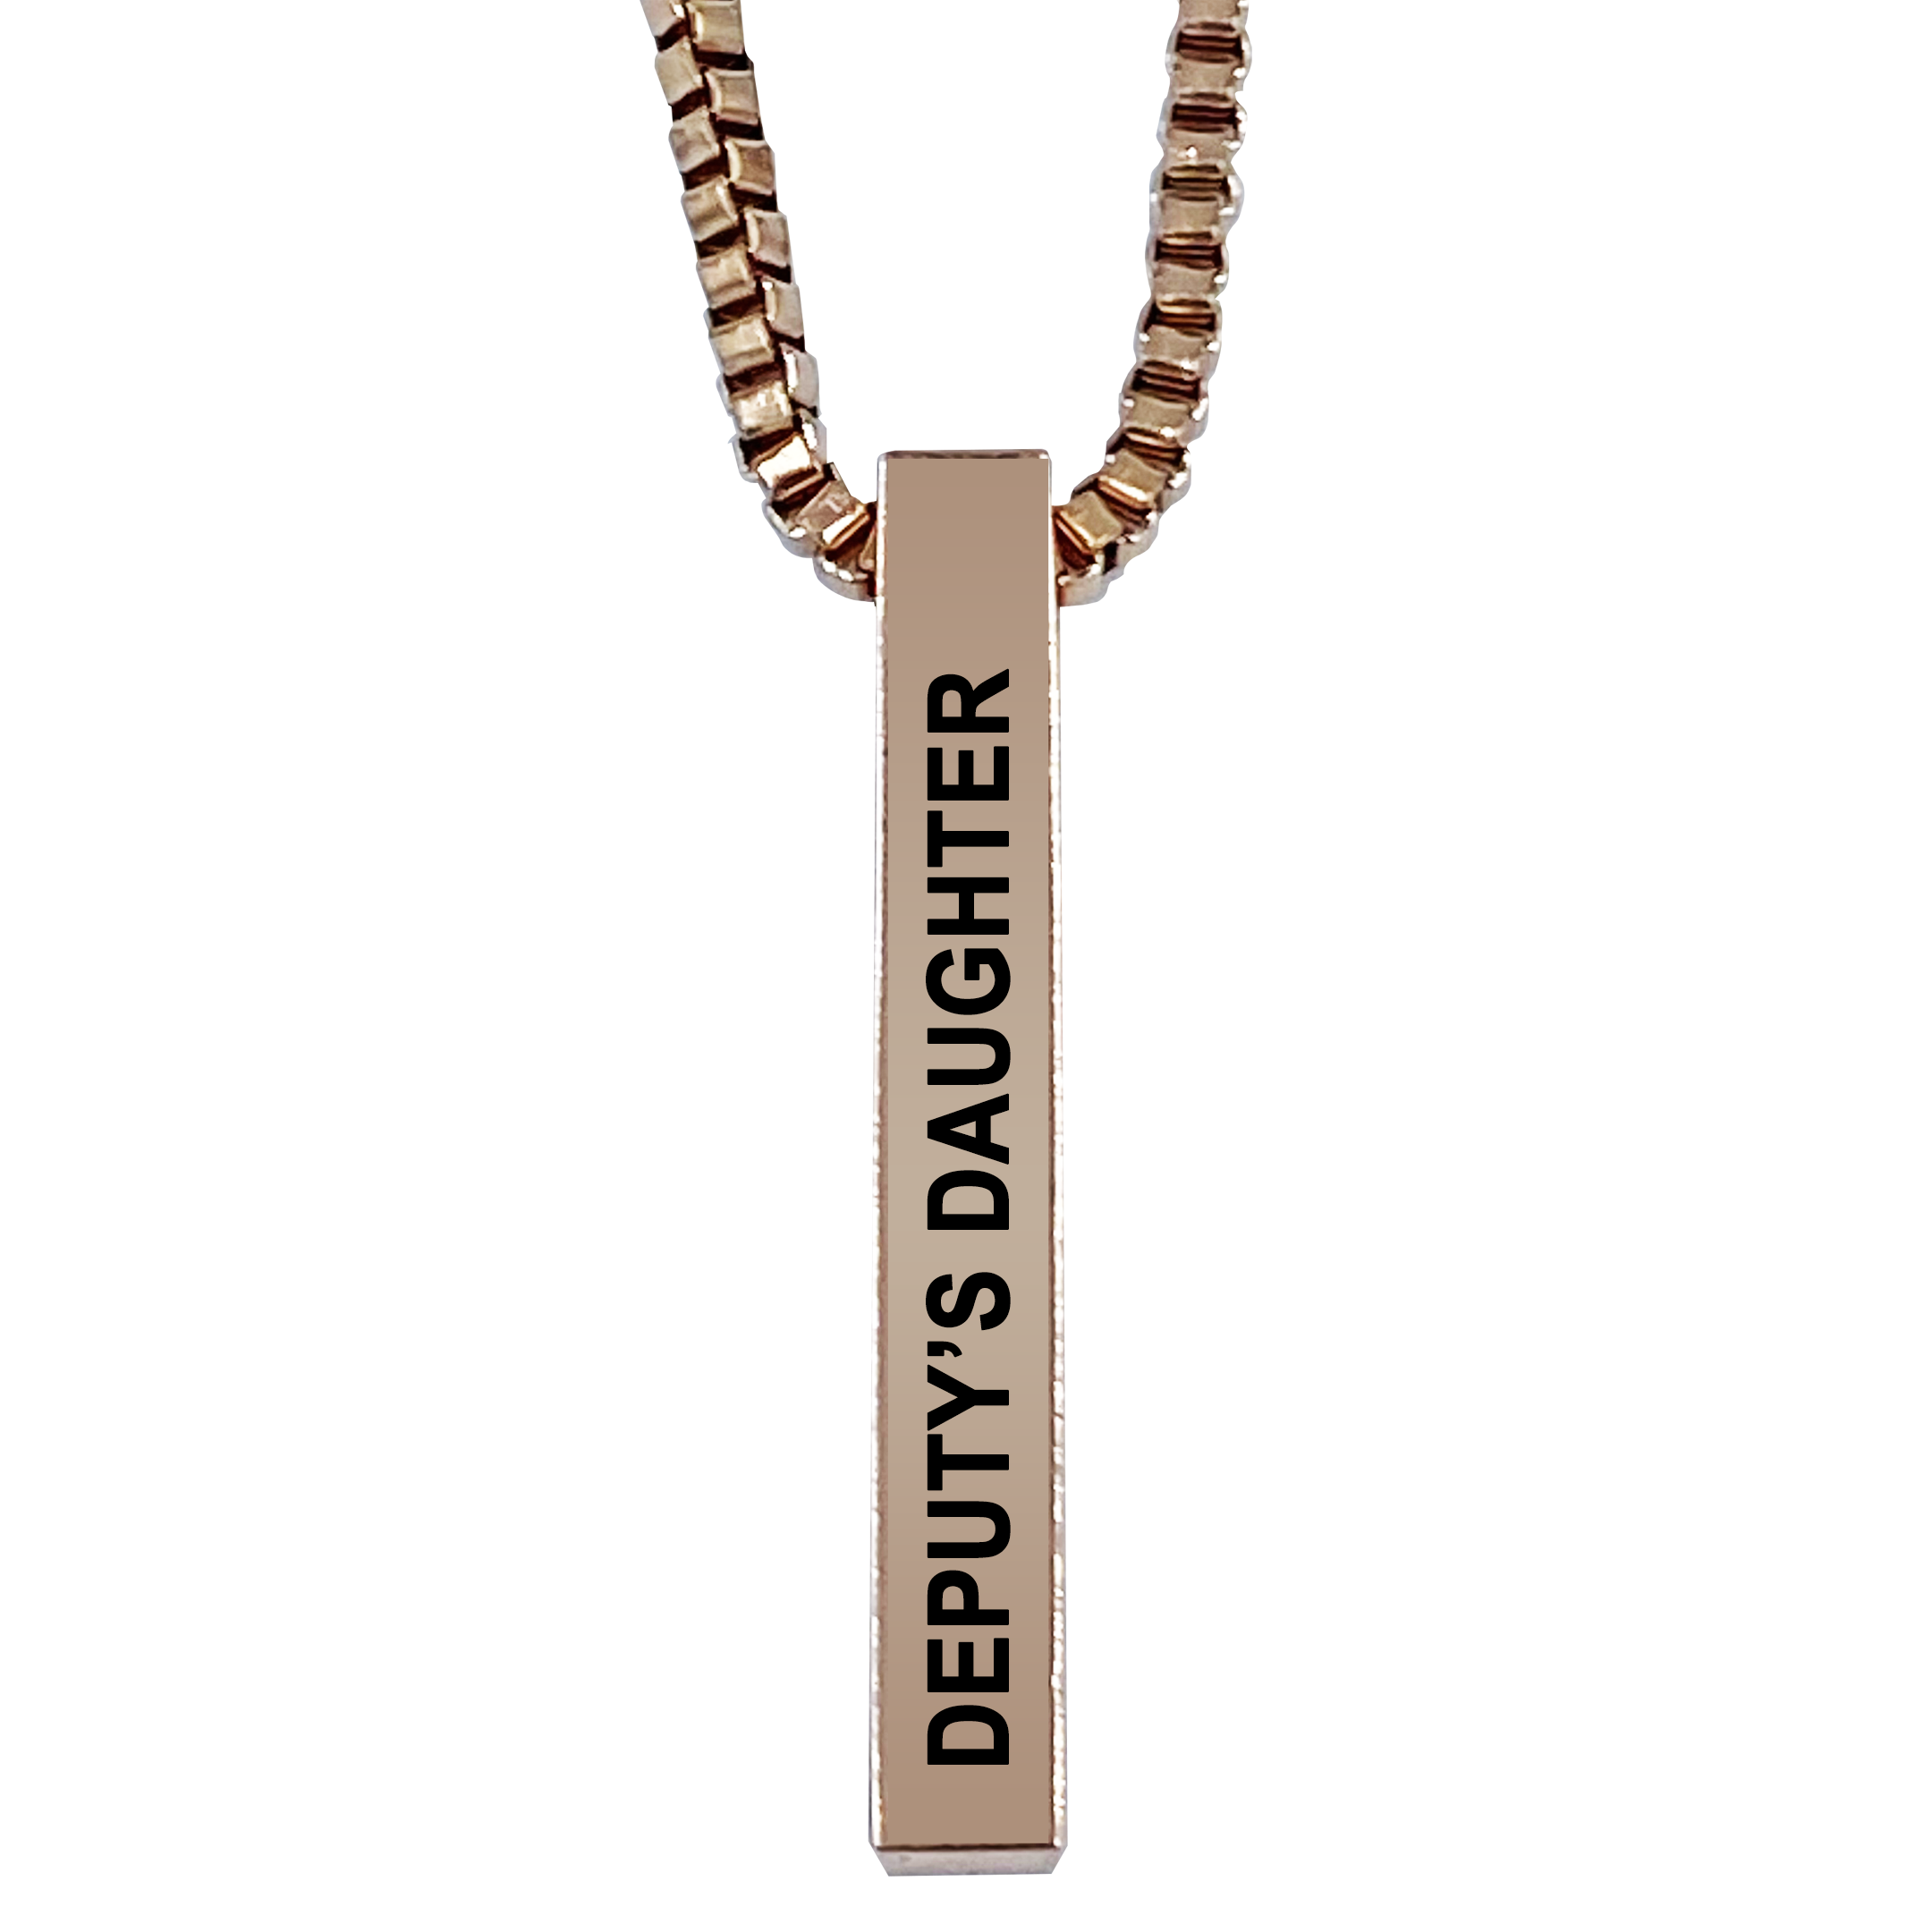 Deputy's Daughter Rose Gold Plated Pillar Bar Pendant Necklace Gift Mother's Day Christmas Holiday Anniversary Police Sheriff Officer First Responder Law Enforcement